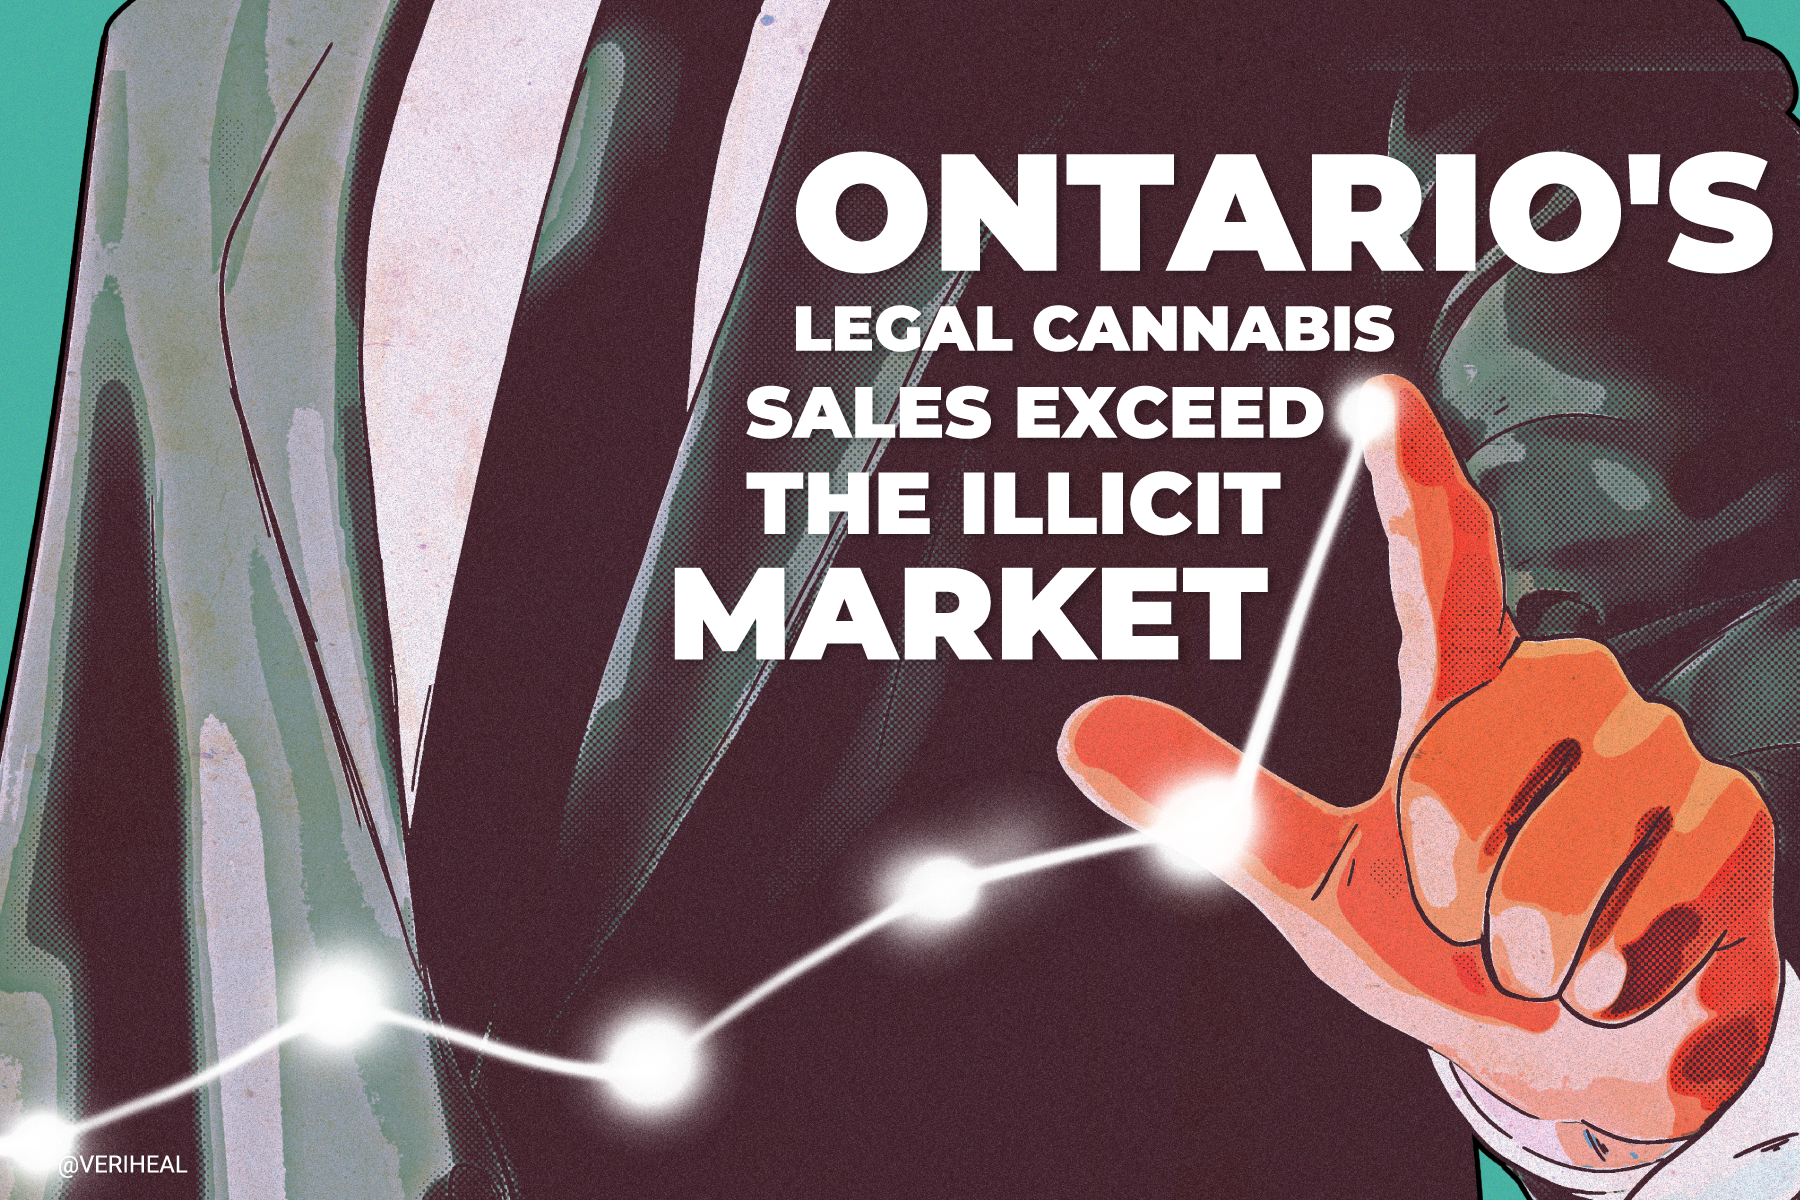 For the First Time Ever, Ontario’s Legal Cannabis Sales Exceed the Illicit Market’s